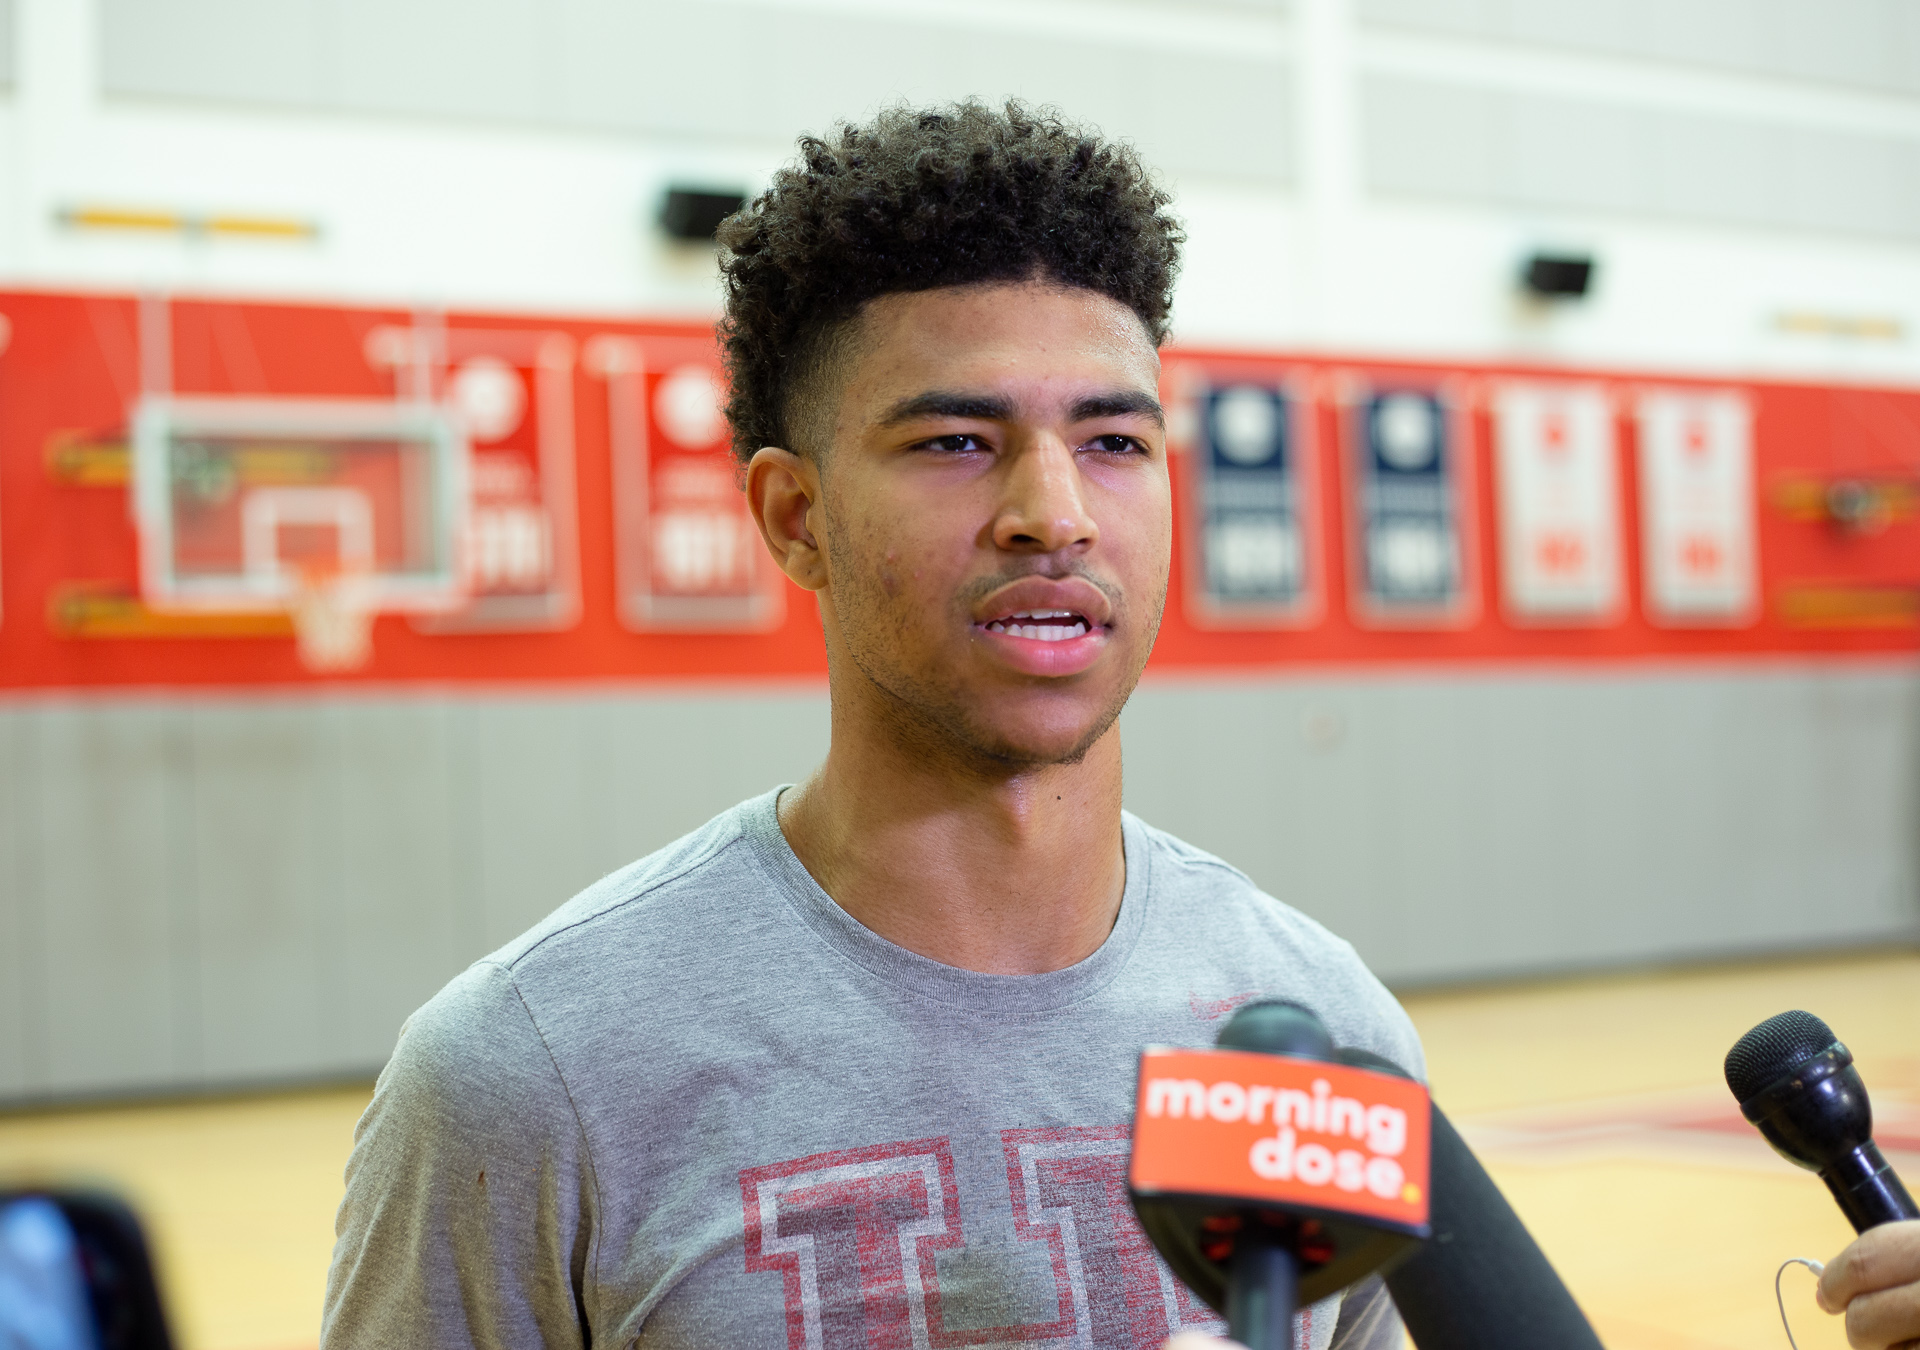 Sophomore Qguard Quentin Grimes joins the Cougars as one of the program's biggest recruits ever. | Trevor Nolley / The Cougar.